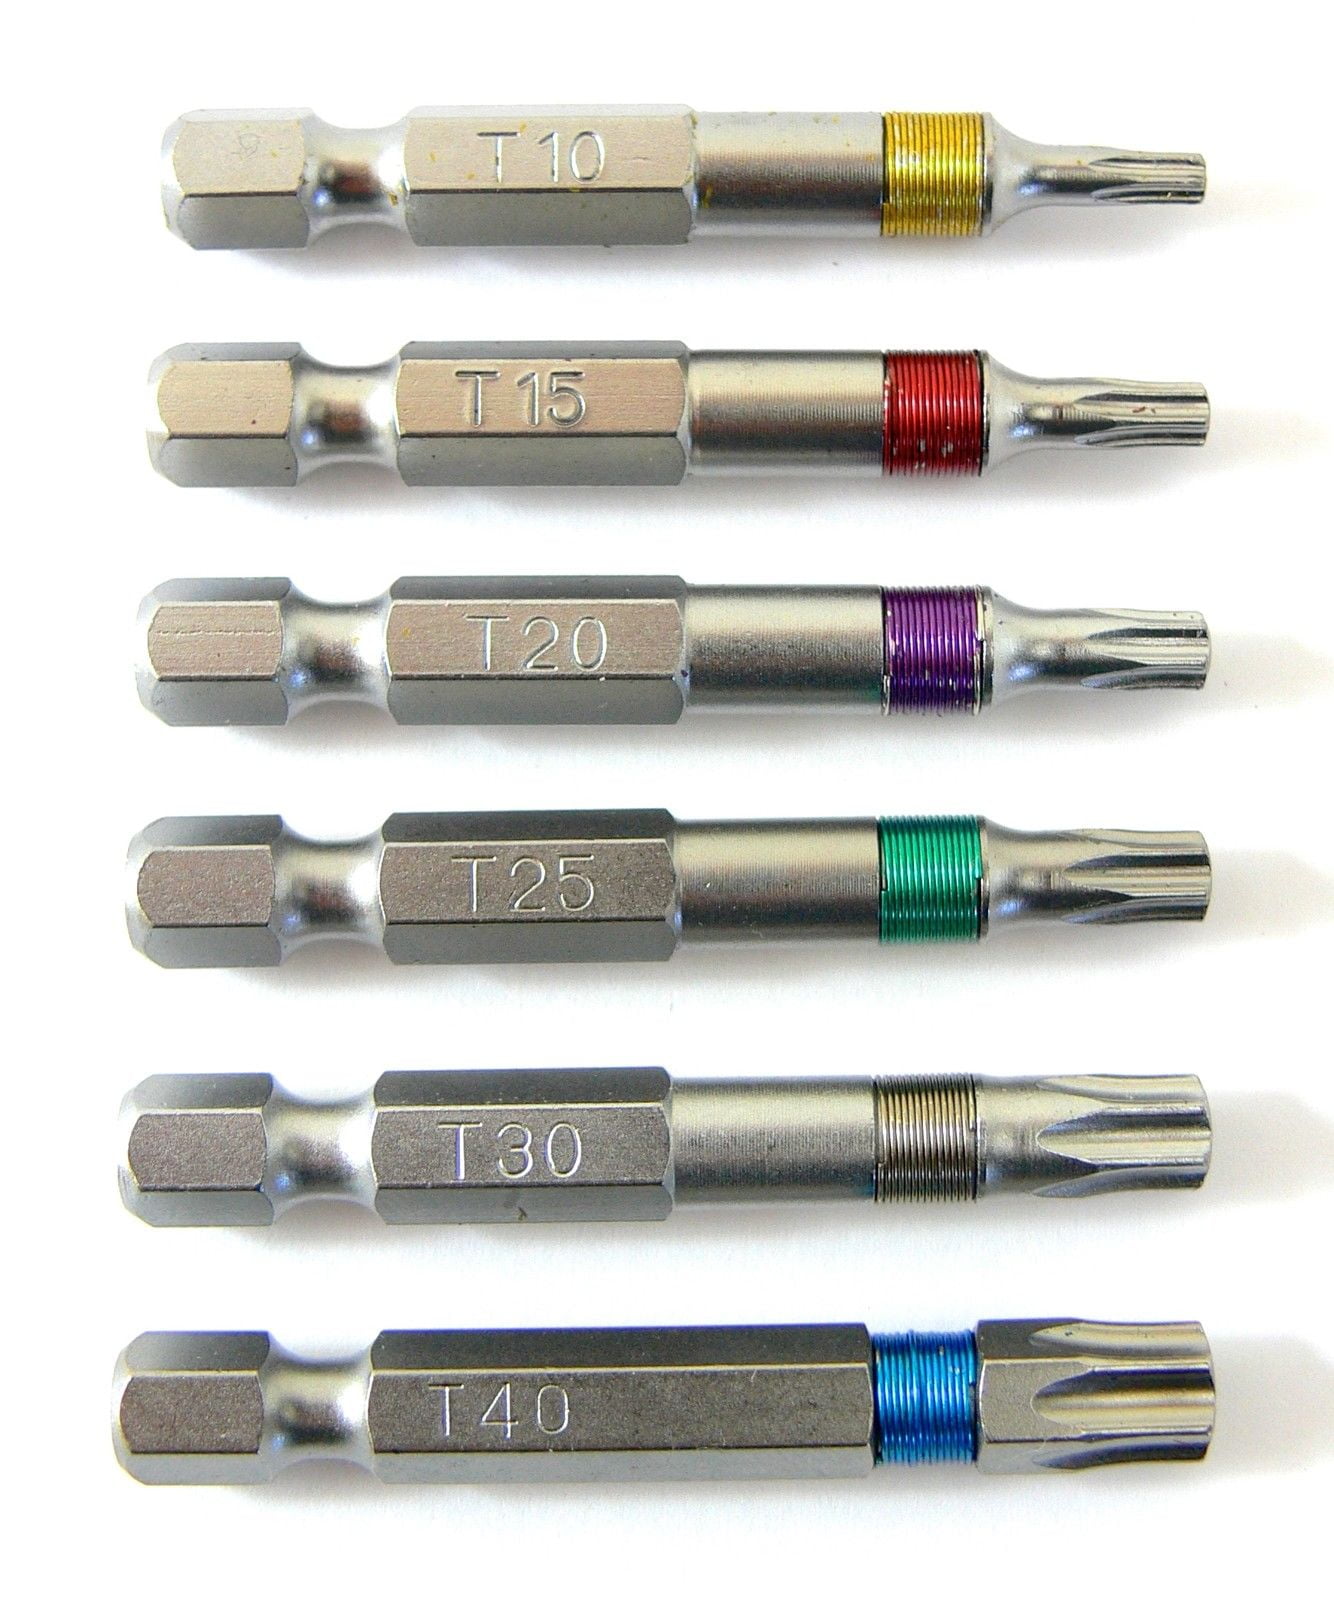 Colour Color Coded Tamperproof Star Torx Key Set 6pc GREAT FOR ELECTRICAL WORK 